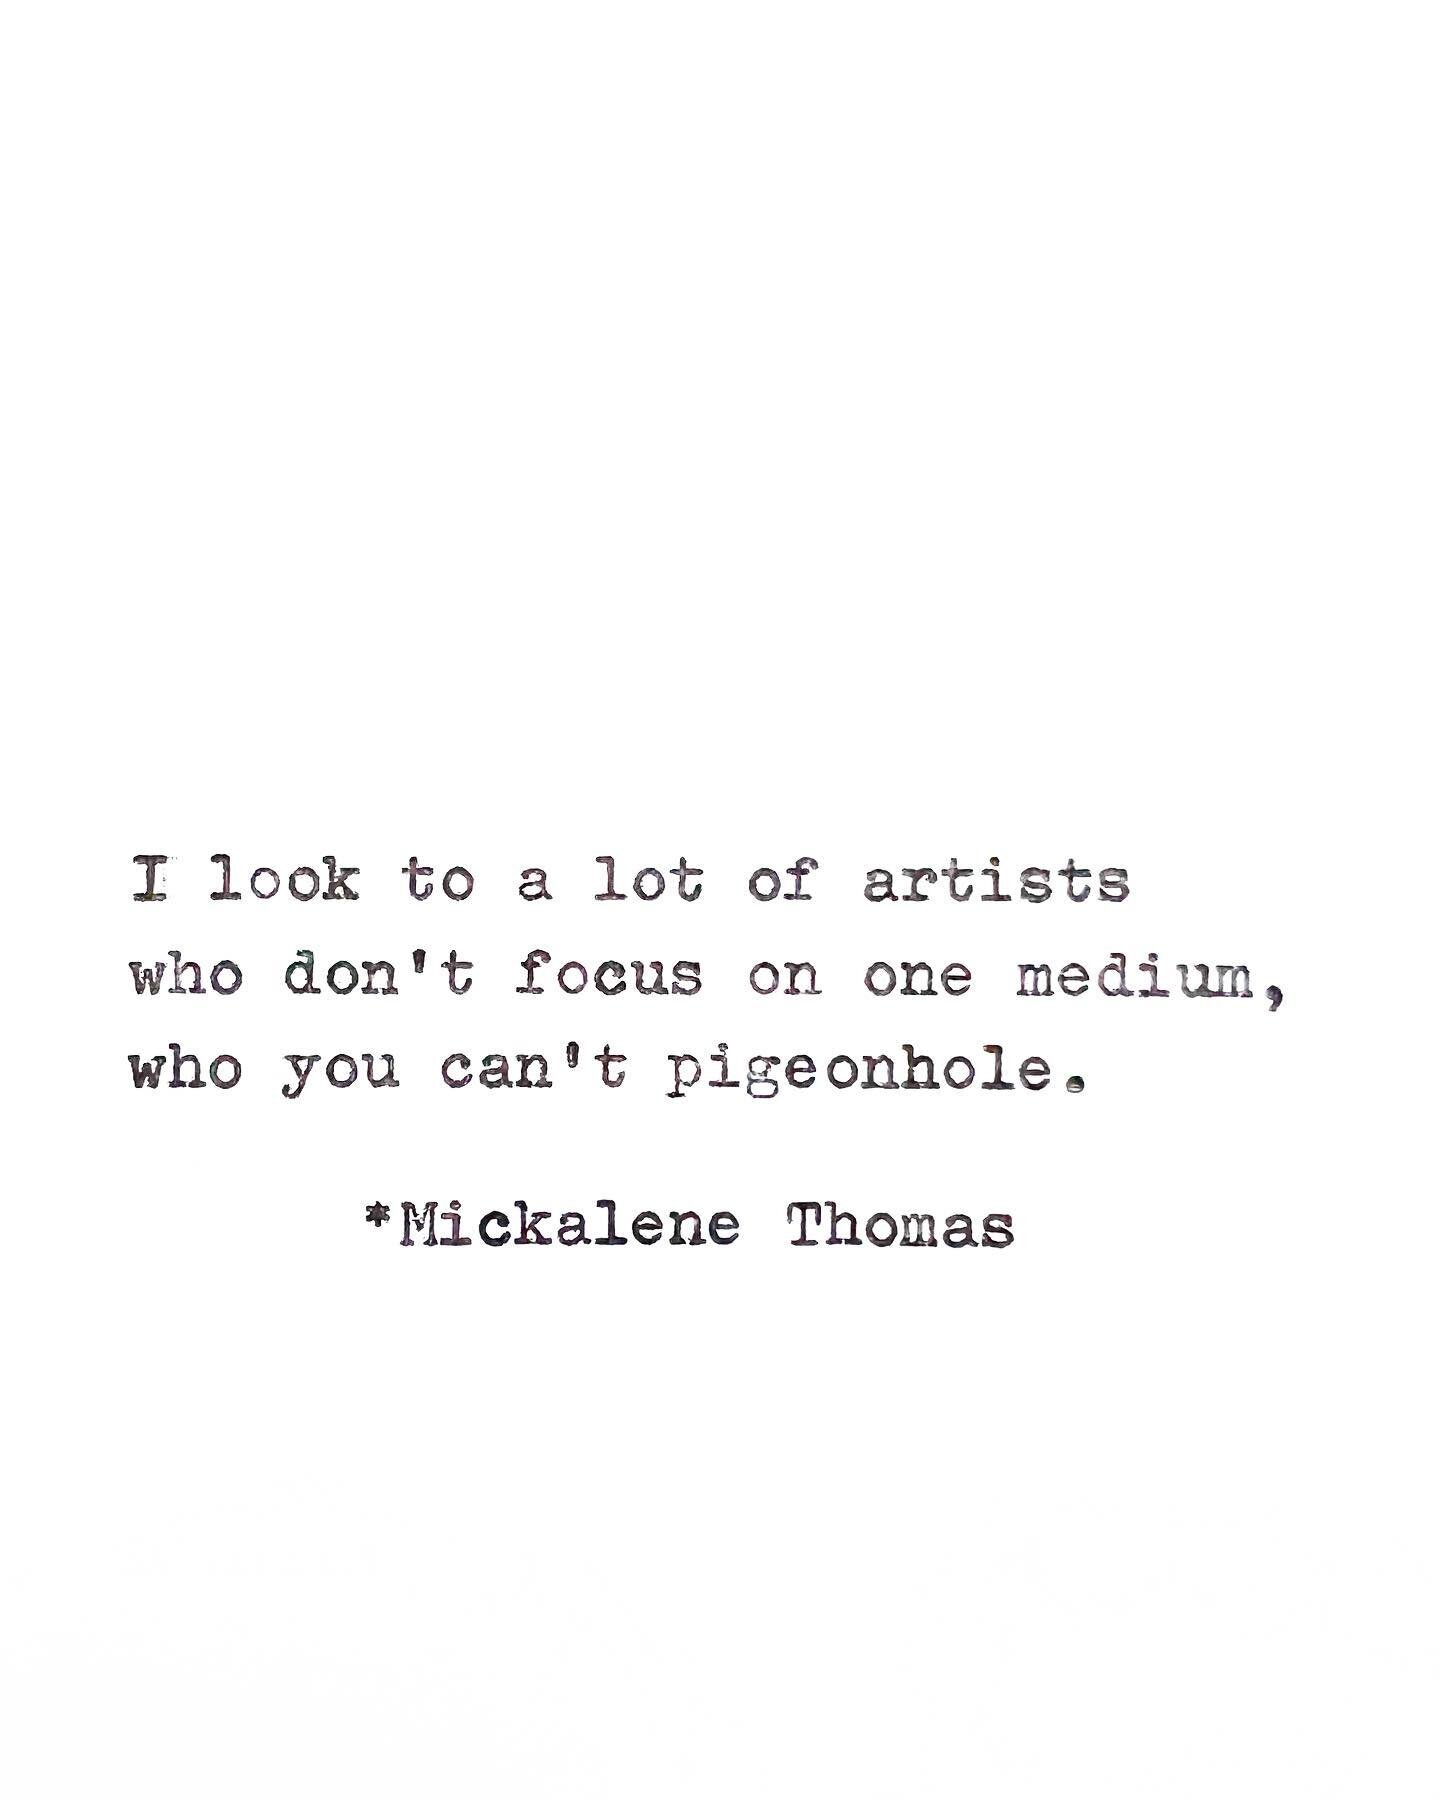 Quote from @mickalenethomas and a snapshot I took of one of her pieces at @womeninthearts in DC back in 2019

:
:
:
:
:

#artistquote #mickalenethomas #nationalmuseumofwomeninthearts #artquote #washingtondc